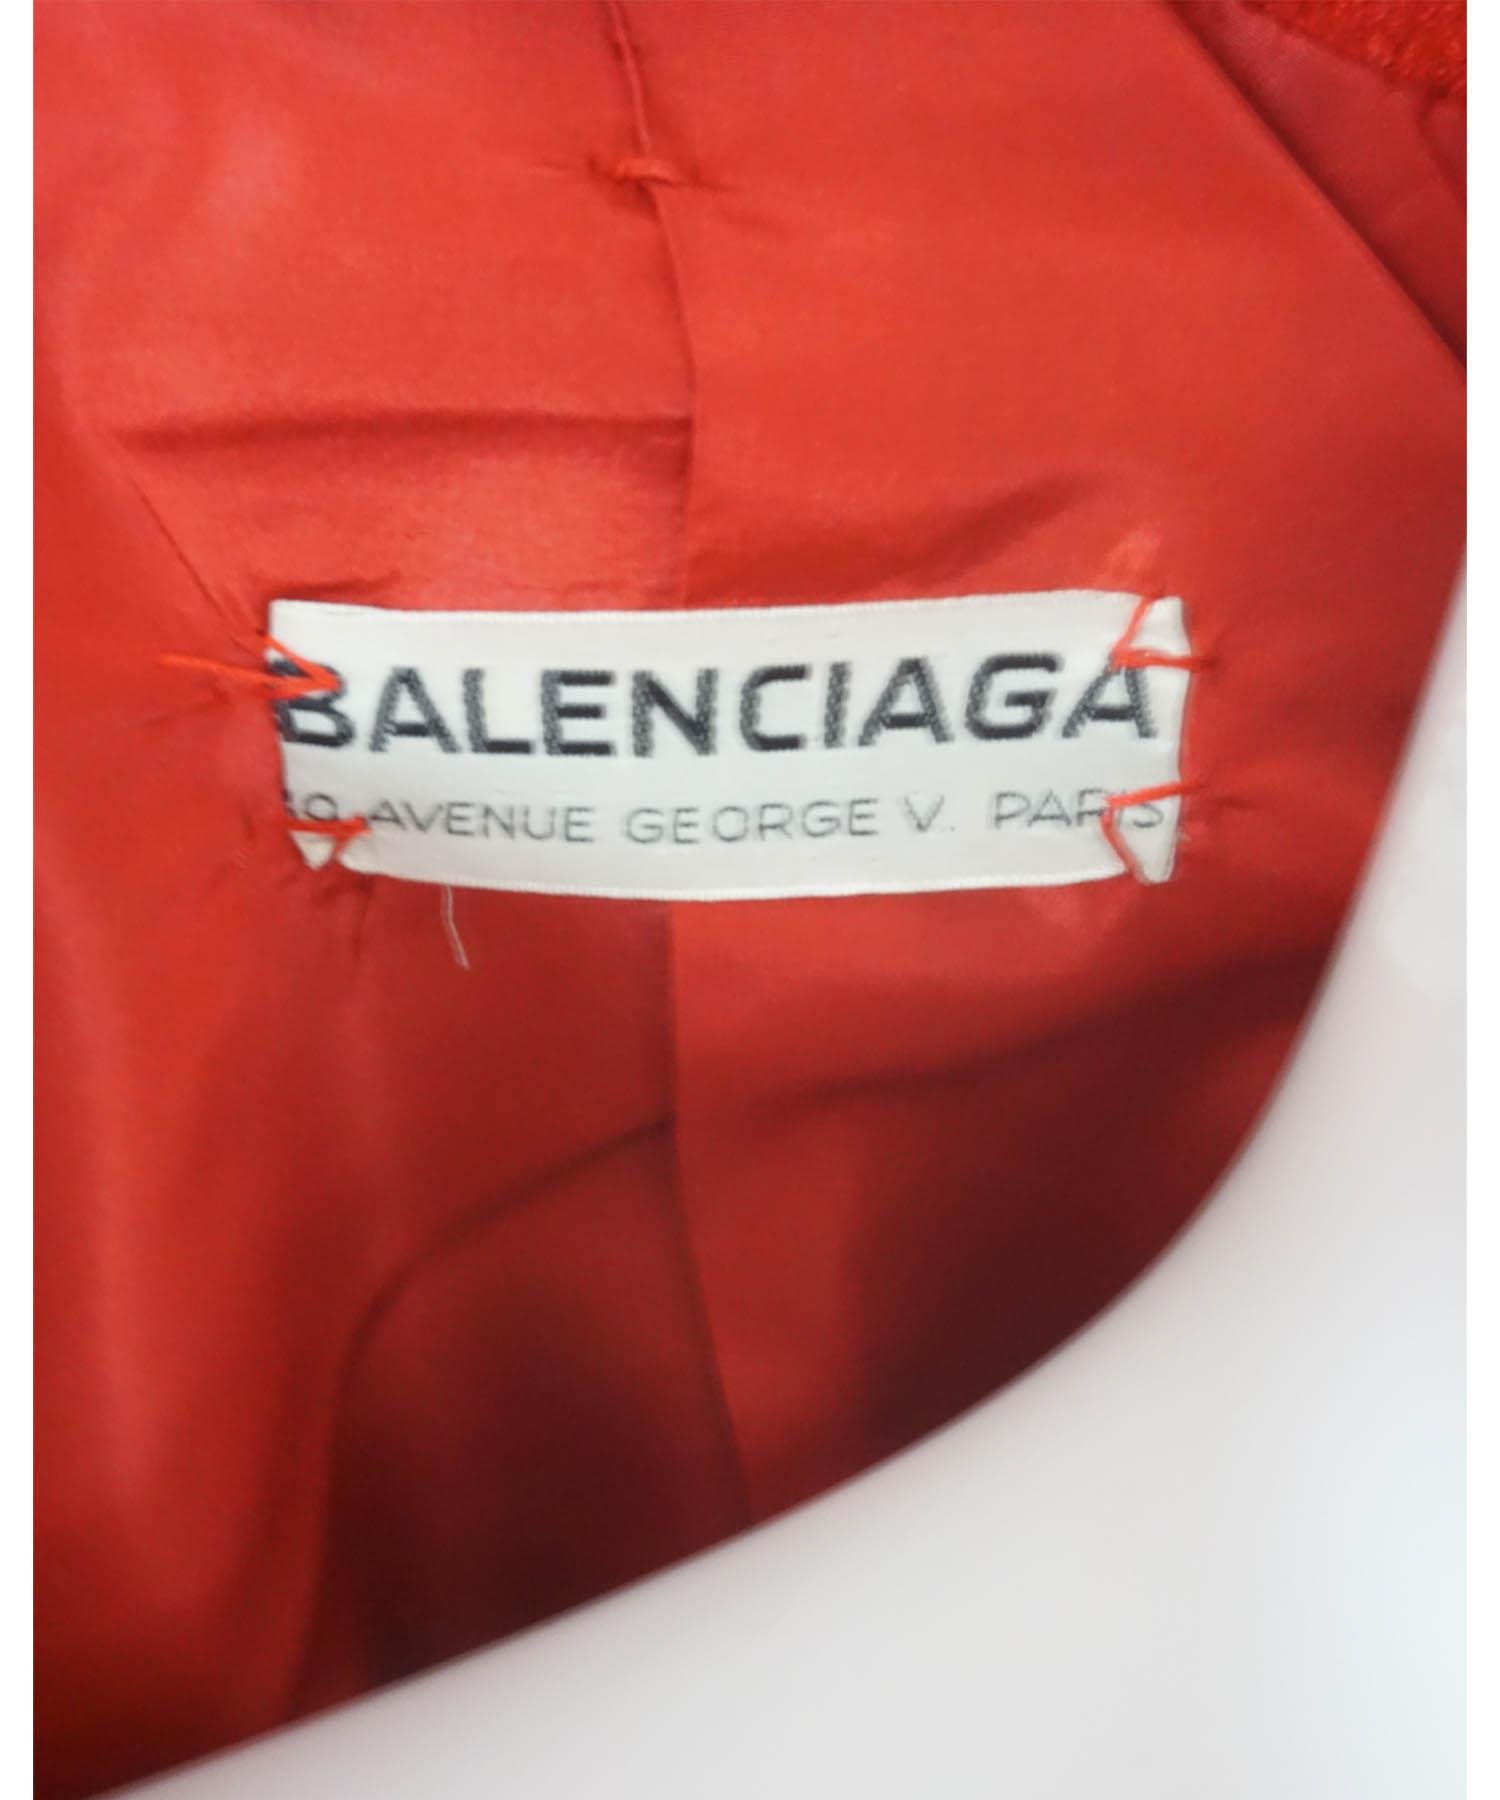 Balenciaga Haute Couture Red Wool Boucle 3 Piece 